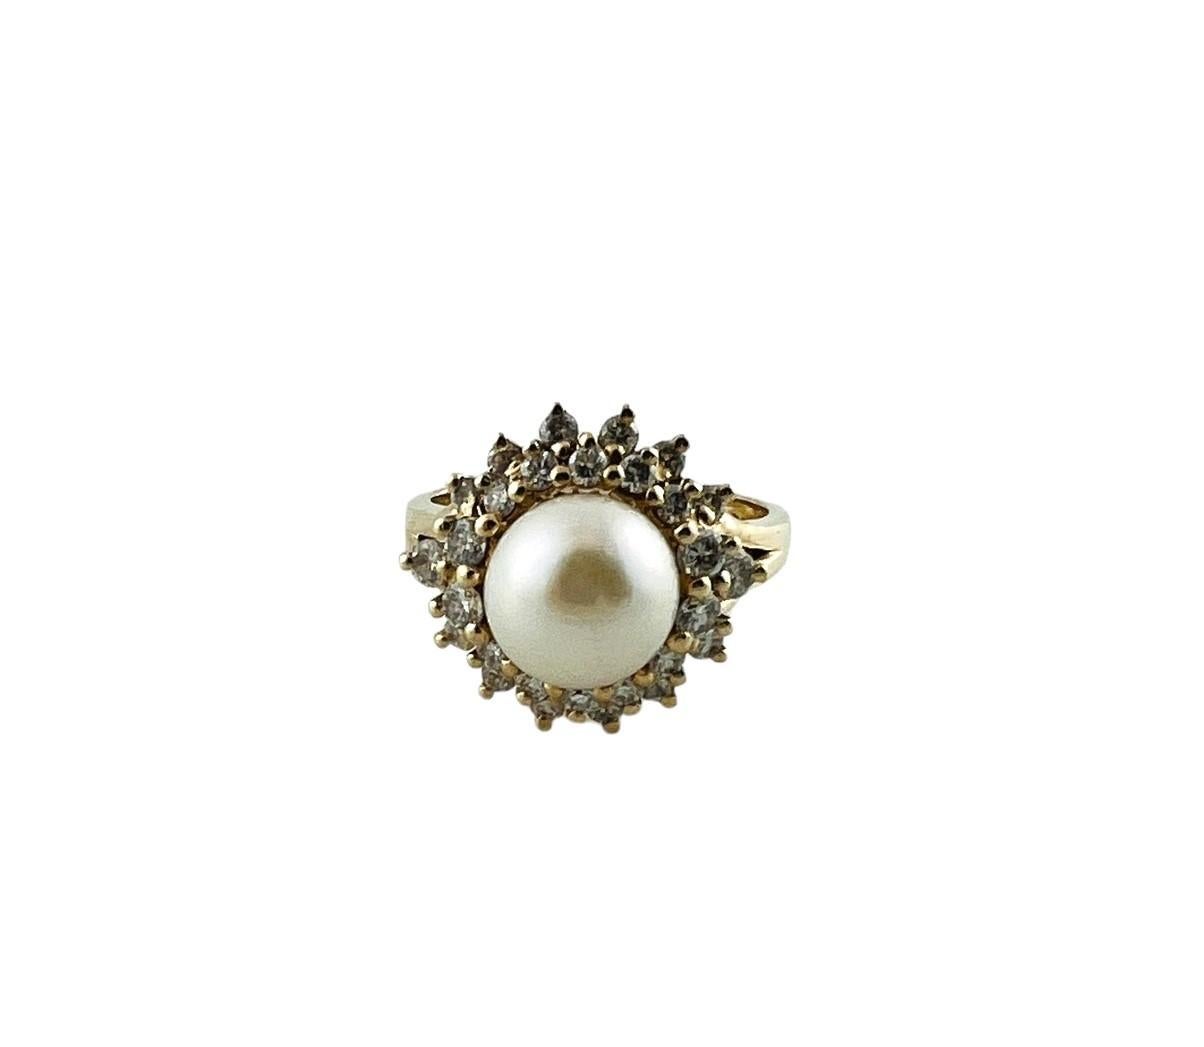 Vintage 14K Yellow Gold Pearl and Diamond Ring Size 7.5-

This stunning ring features one round white cultured pearl (9 mm) and 28 round brilliant cut diamonds set in classic 14K yellow gold.  Width: 15 mm.  Shank: 2 mm.

Approximate total diamond